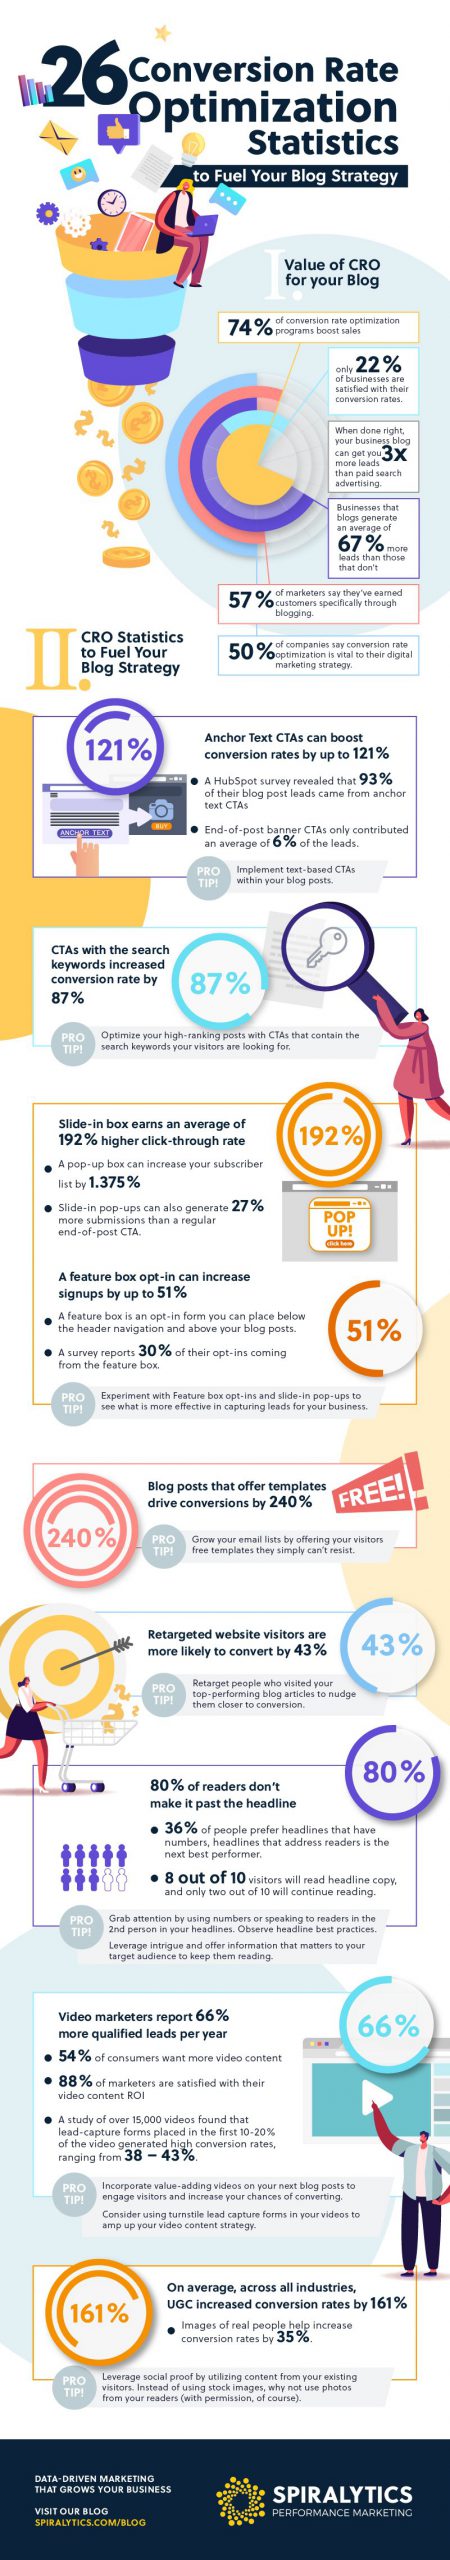 26 blogging stats to help improve the conversion rate of your blog infographic scaled 1